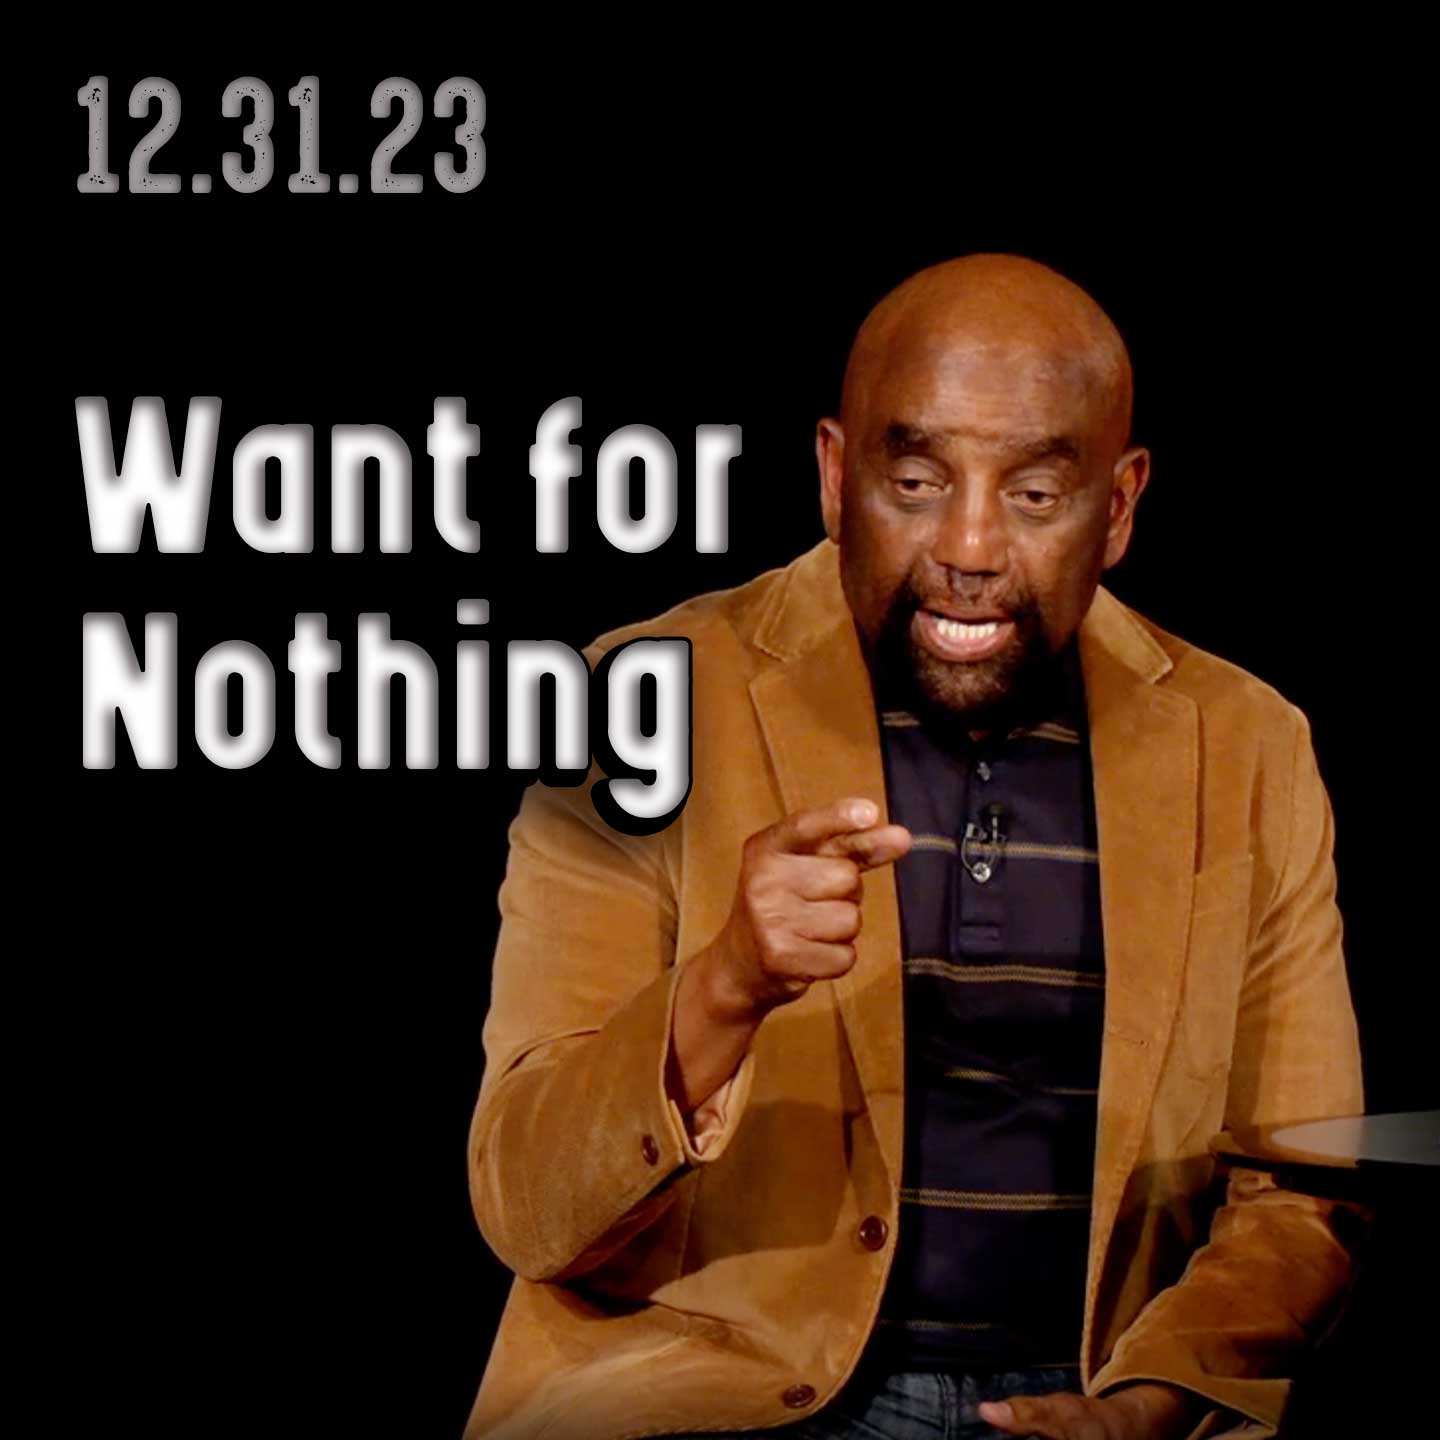 What is wisdom? Church 12/31/23 Want for Nothing